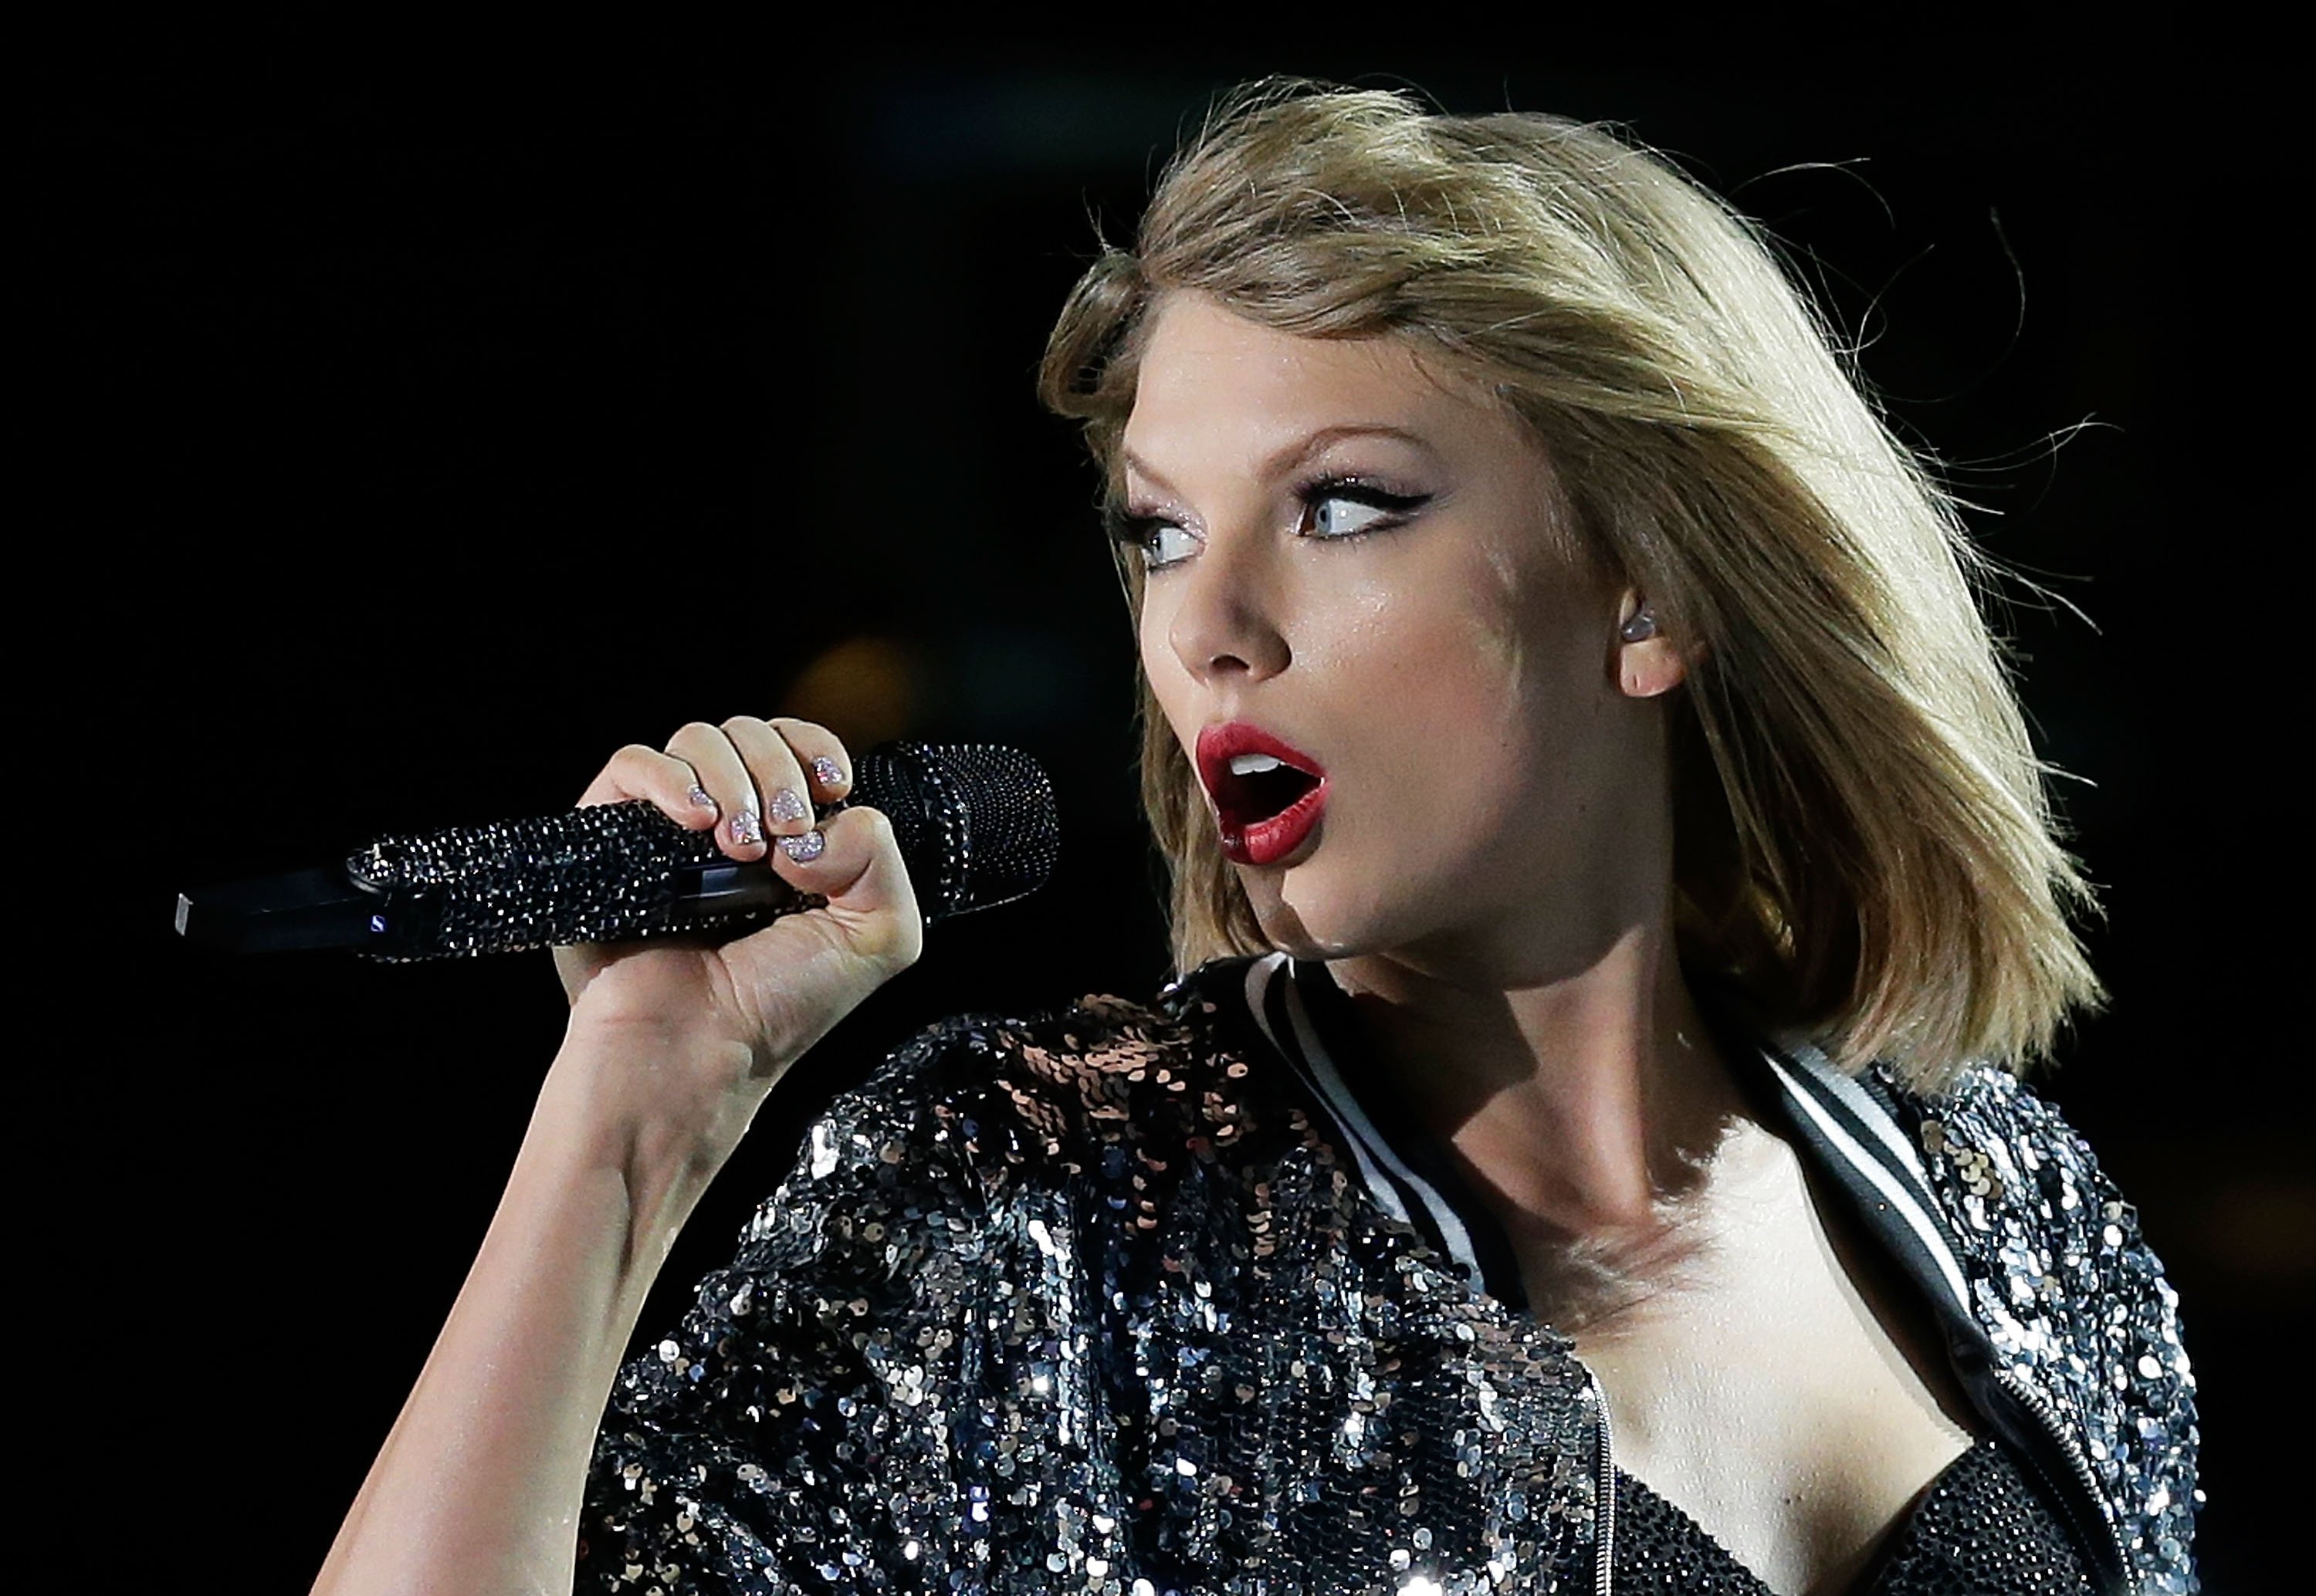 Taylor Swift performs during her '1989' World Tour on November 28, 2015 in Sydney, Australia.